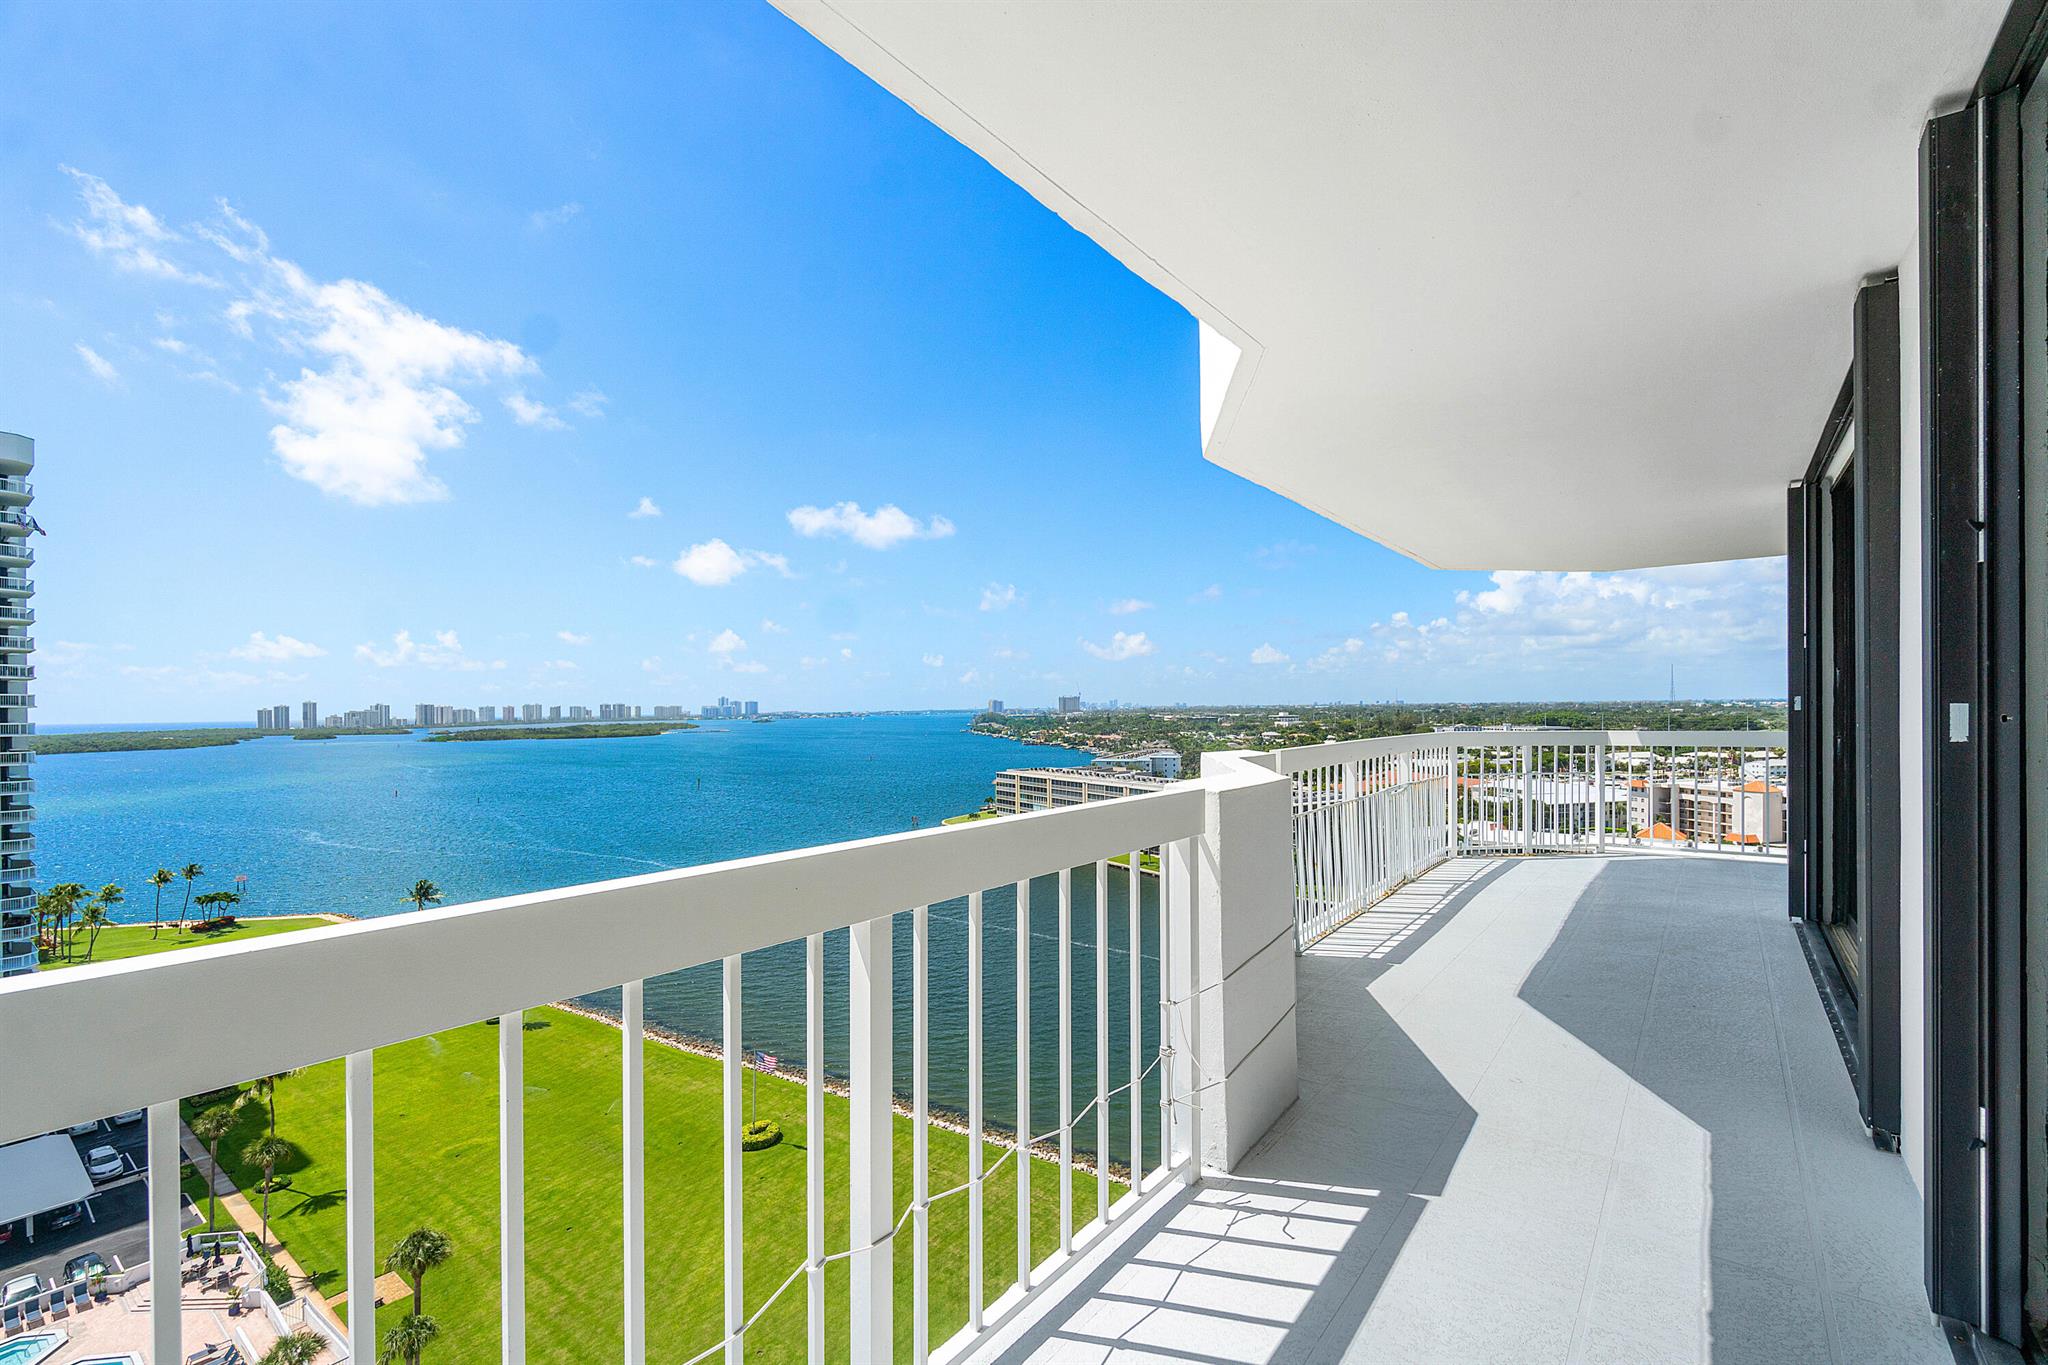 Unique, opportunity to obtain an investment property at Old Port Cove Towers on a high floor with the most desirable unit view. Full unobstructed wrap around views of the intracoastal, marina, Singer Island and more. Very large living spaces, large bedrooms,  laundry room and tons of storage. There is currently a lease on the unit so immediate move-in is not an option. Perfect opportunity as an investment for the short term with move-in later or keep as a long term investment.